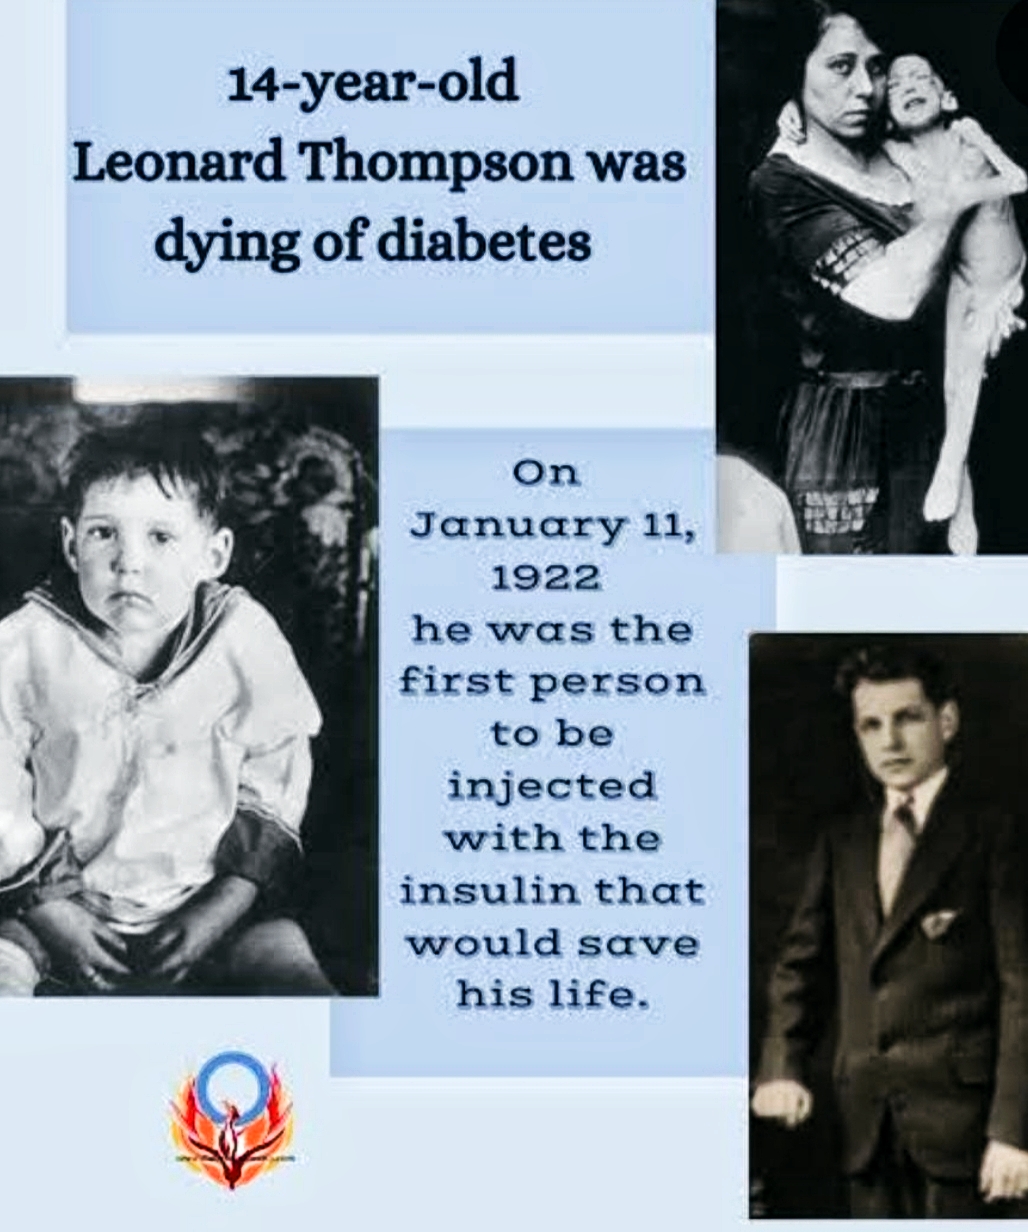 January 11 marks 100 years of discovery and use of insulin, which has saved millions of lives around the world.